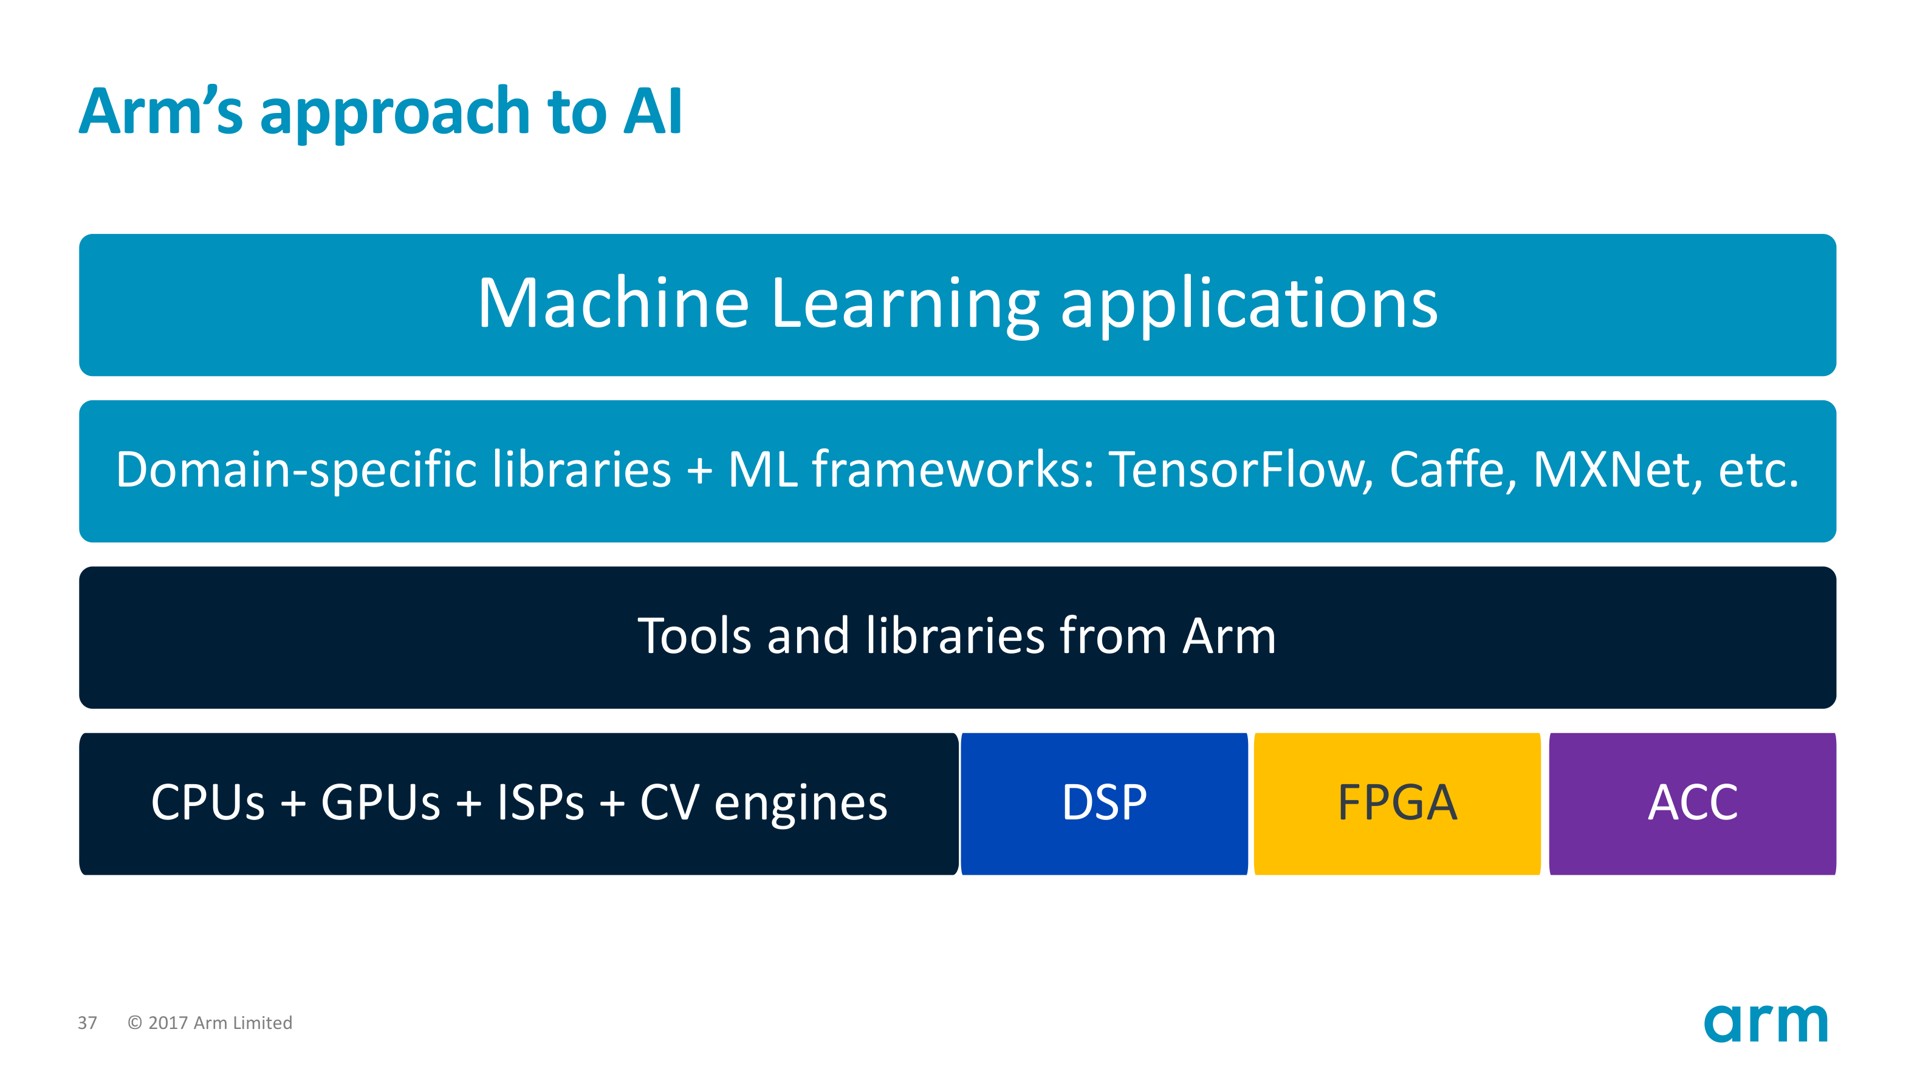 arm approach to machine learning applications | SoftBank